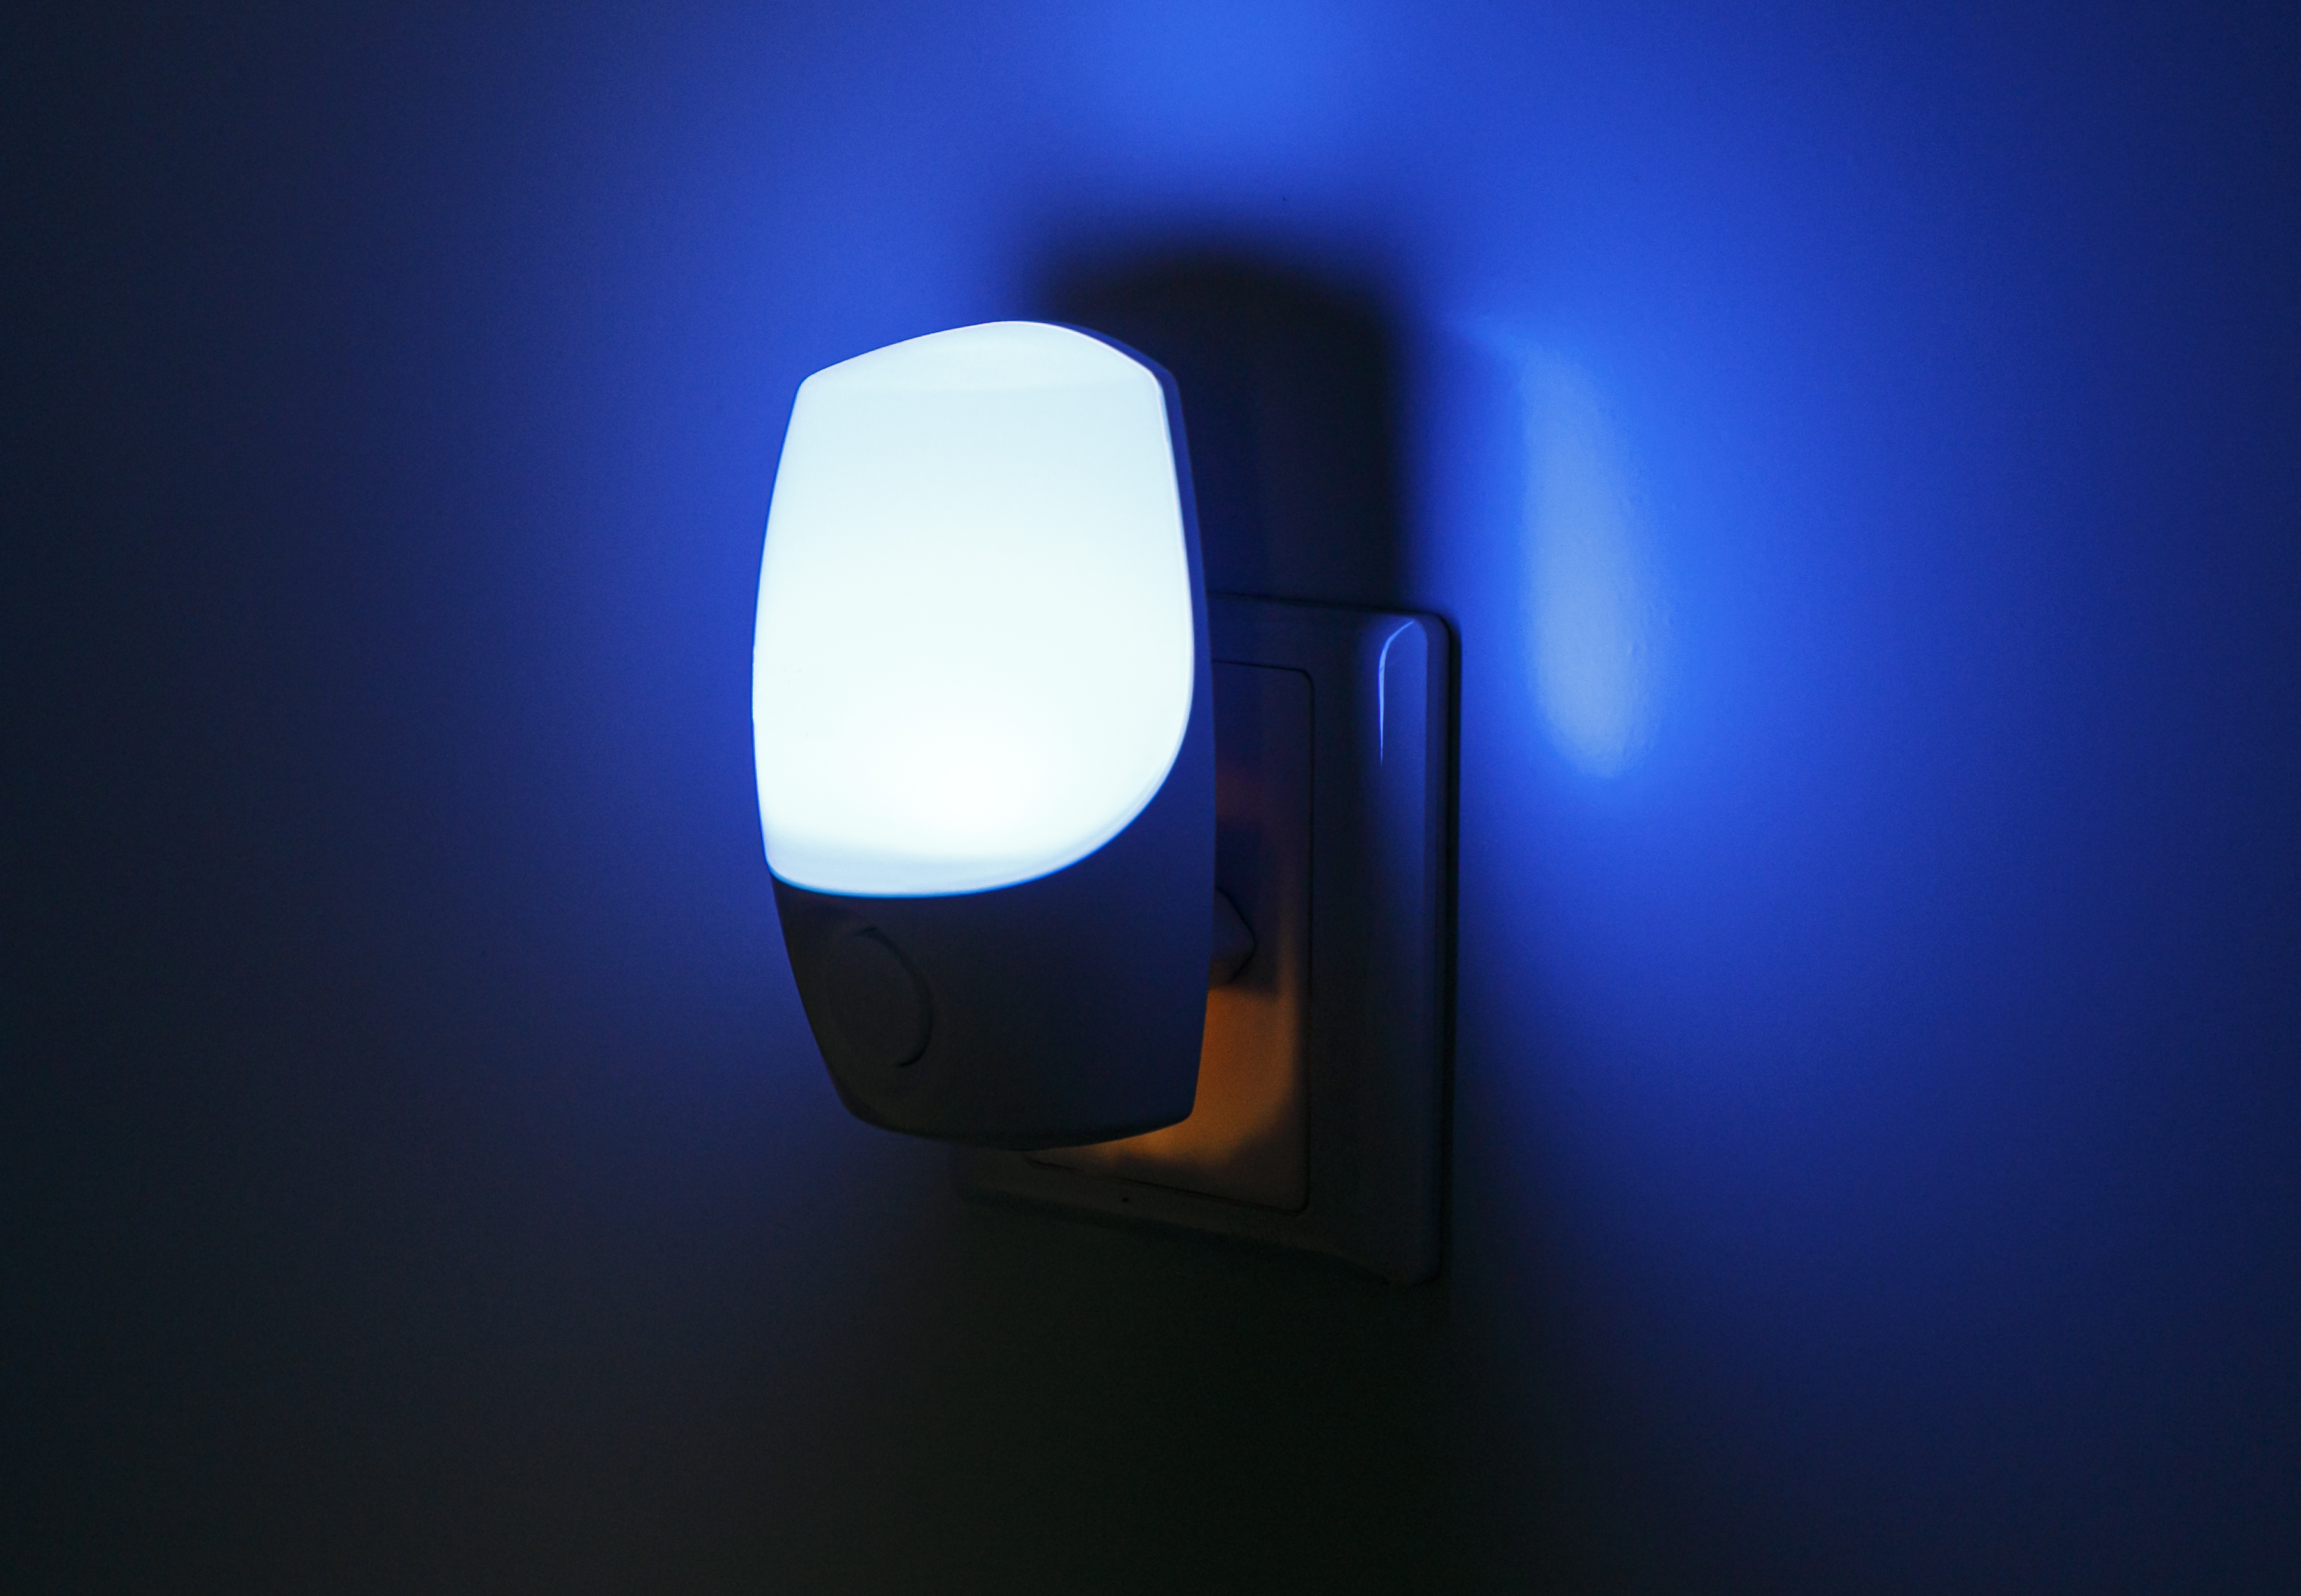 The Illuminating Advantages of Plug-In Night Lights for Better Sleep and Safety